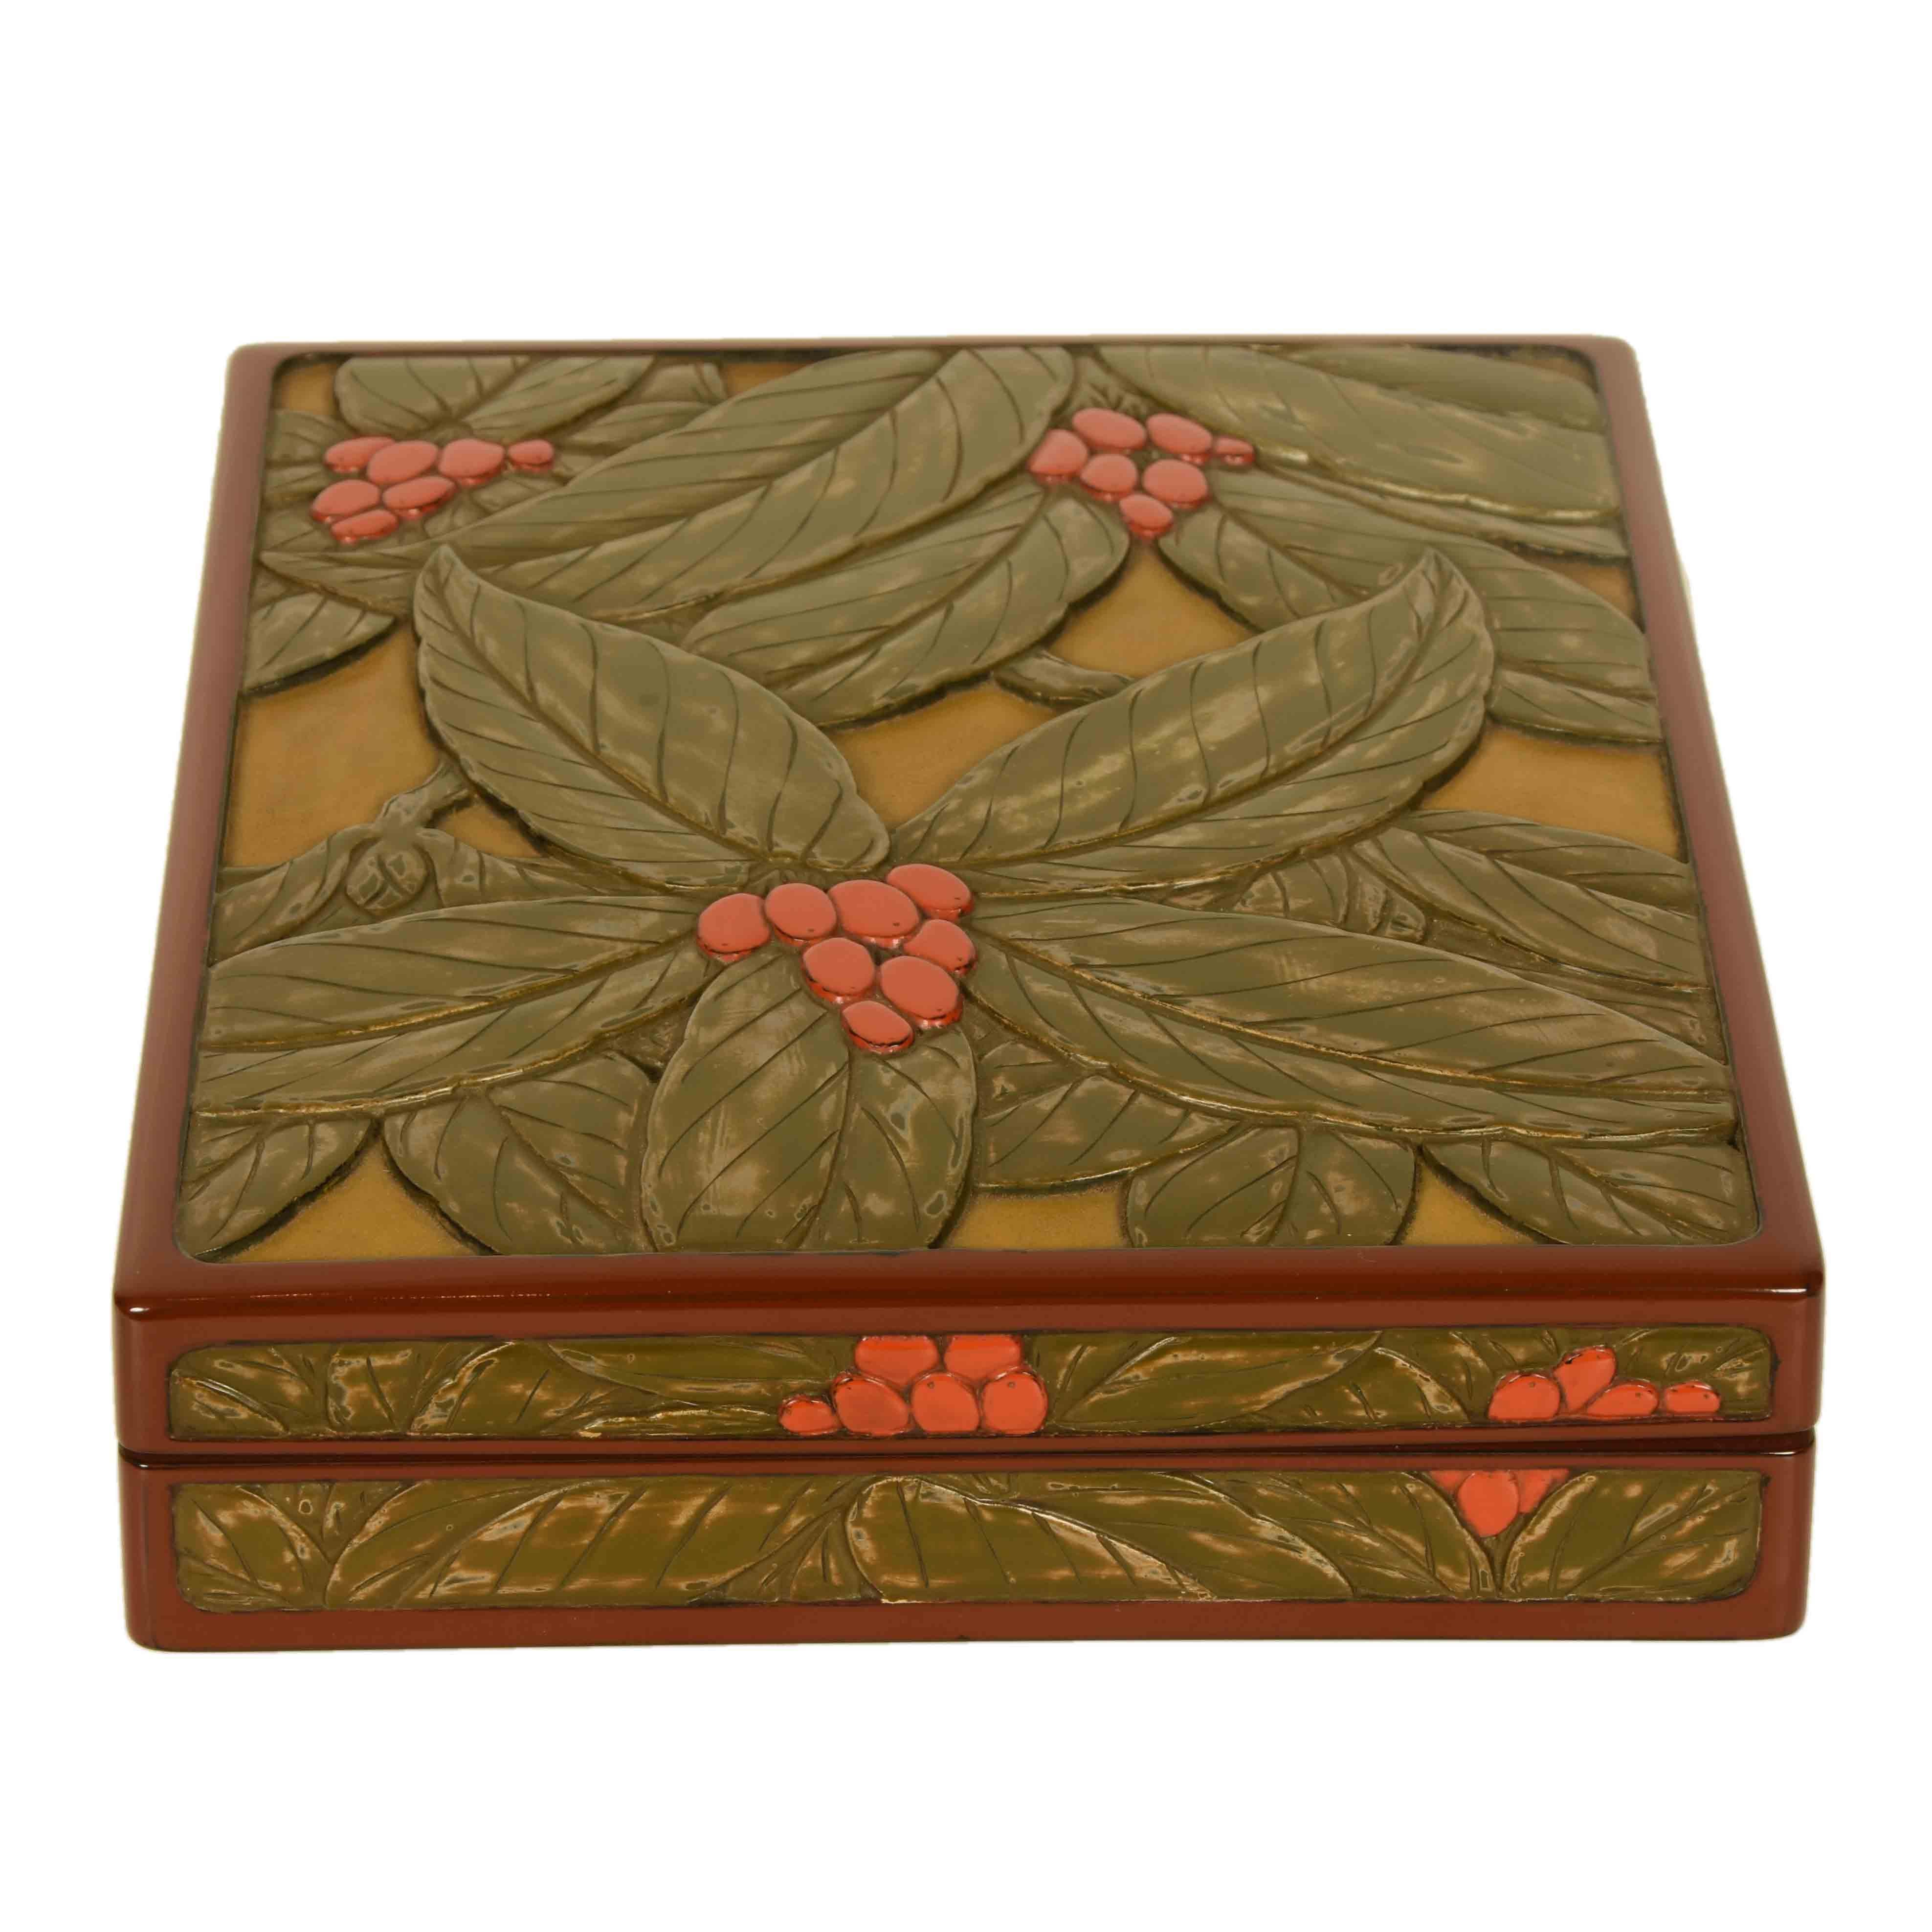 Wood Japanese Carved Kamakura Lacquer Box with Botanical Design by Tamerou Ono For Sale